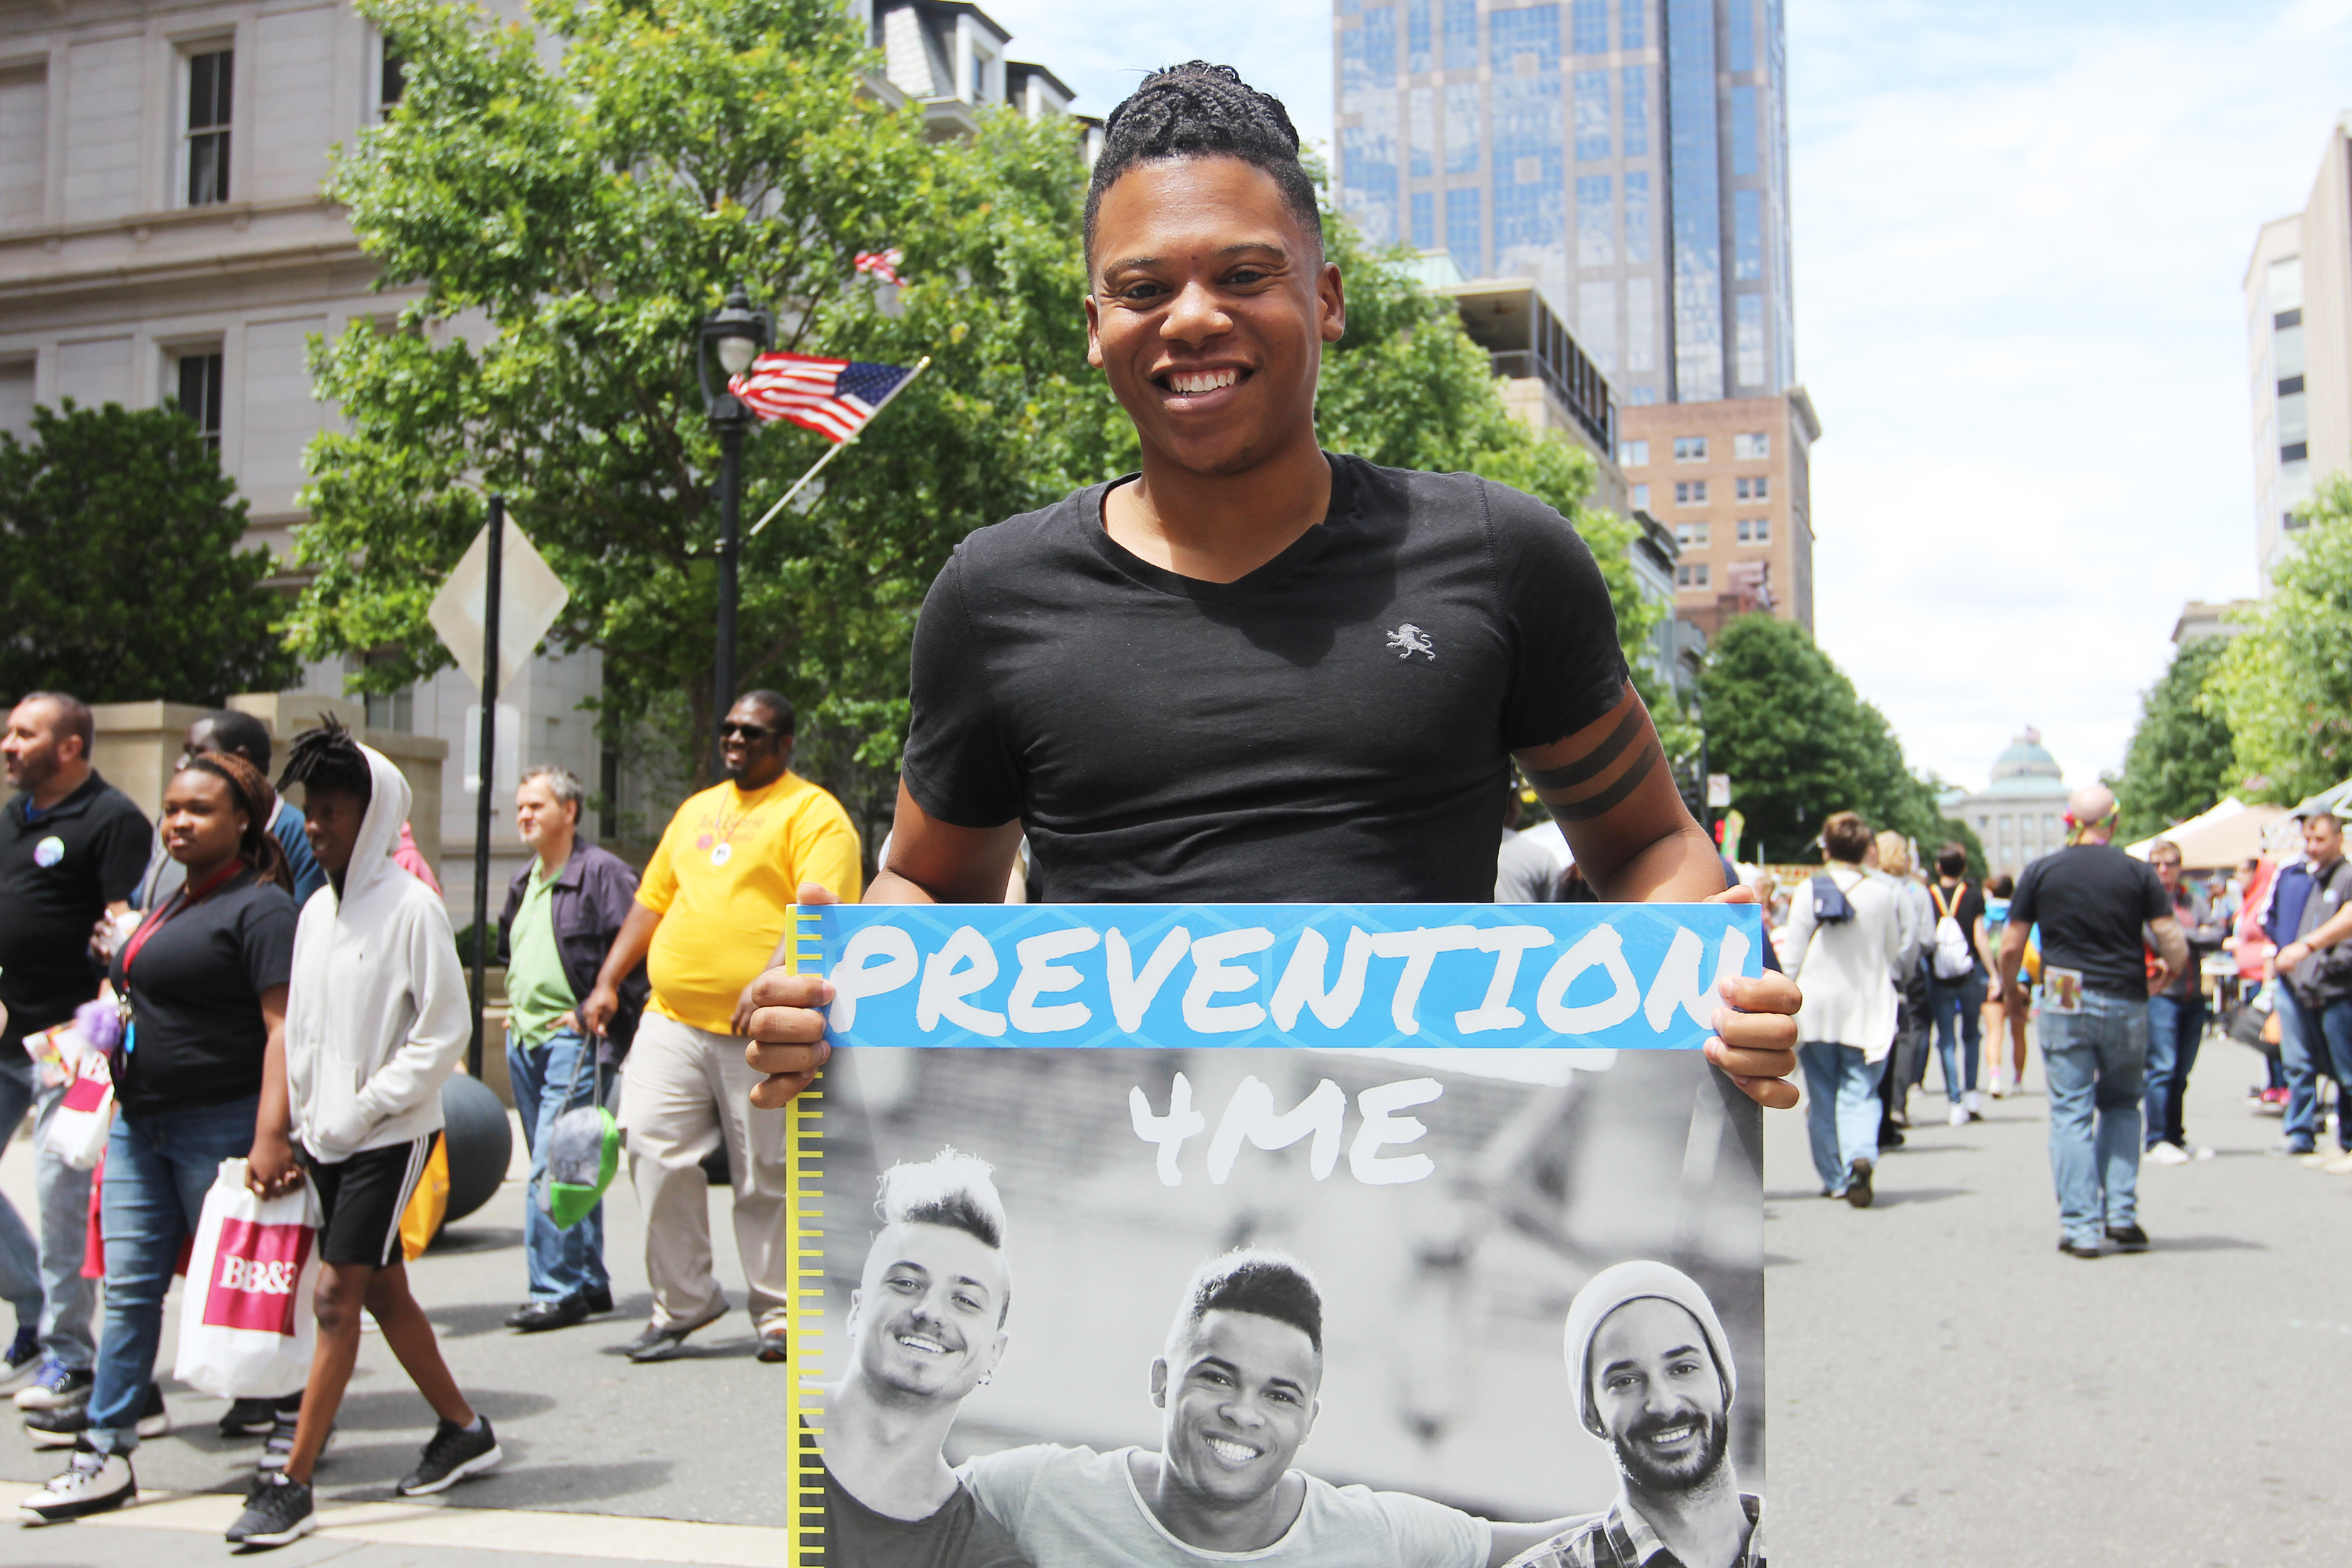 Felton Thomas holds up a sign that reads "Prevention 4 me" at an event that supports the LGBT Center in Raleigh